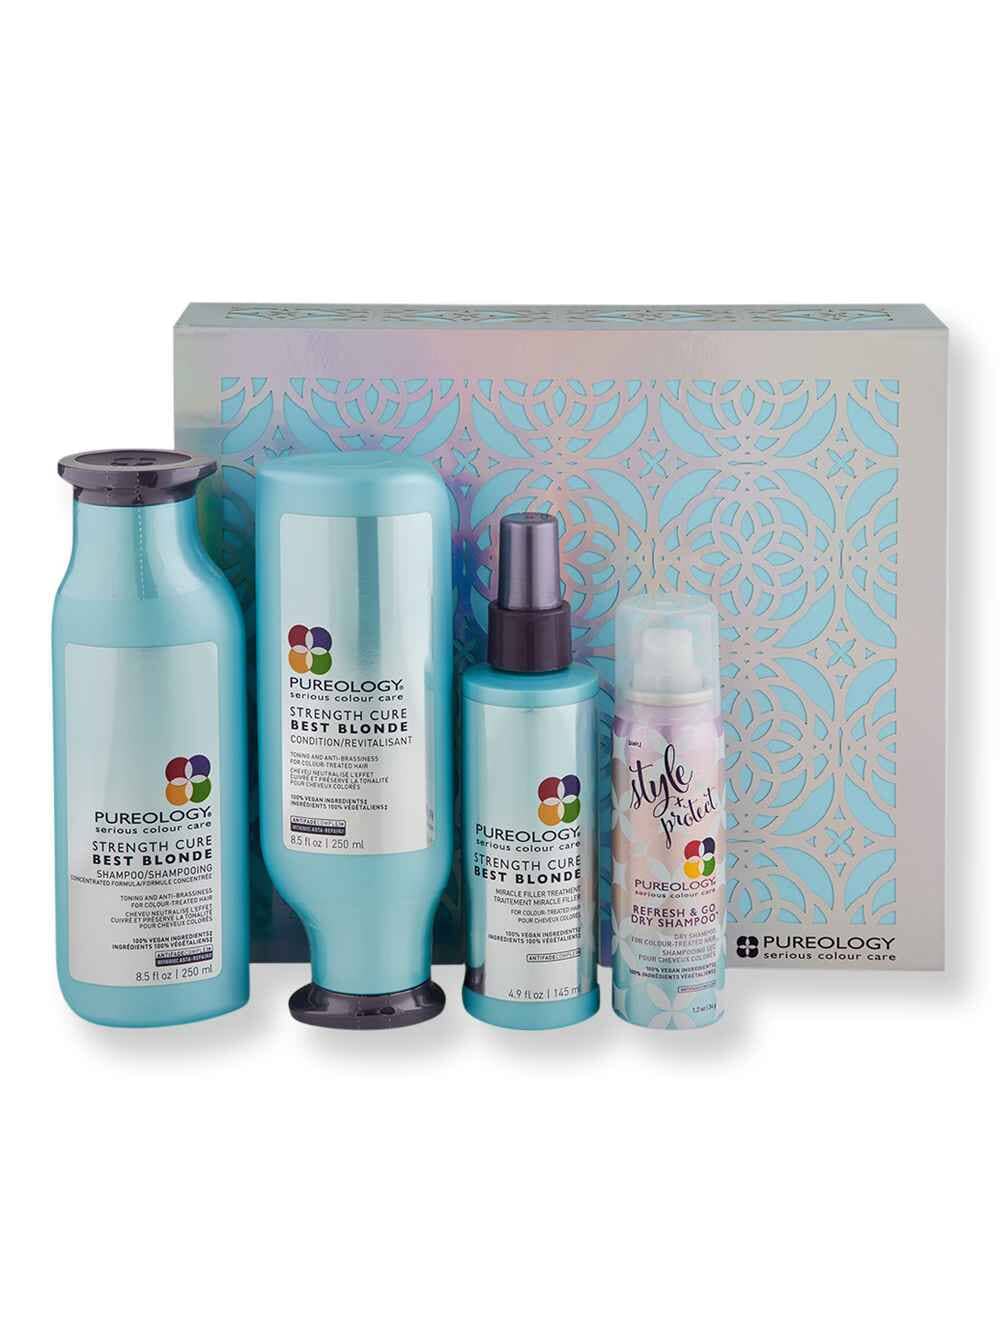 Pureology Pureology Strength Cure Best Blonde Holiday Gift Set Hair Care Value Sets 